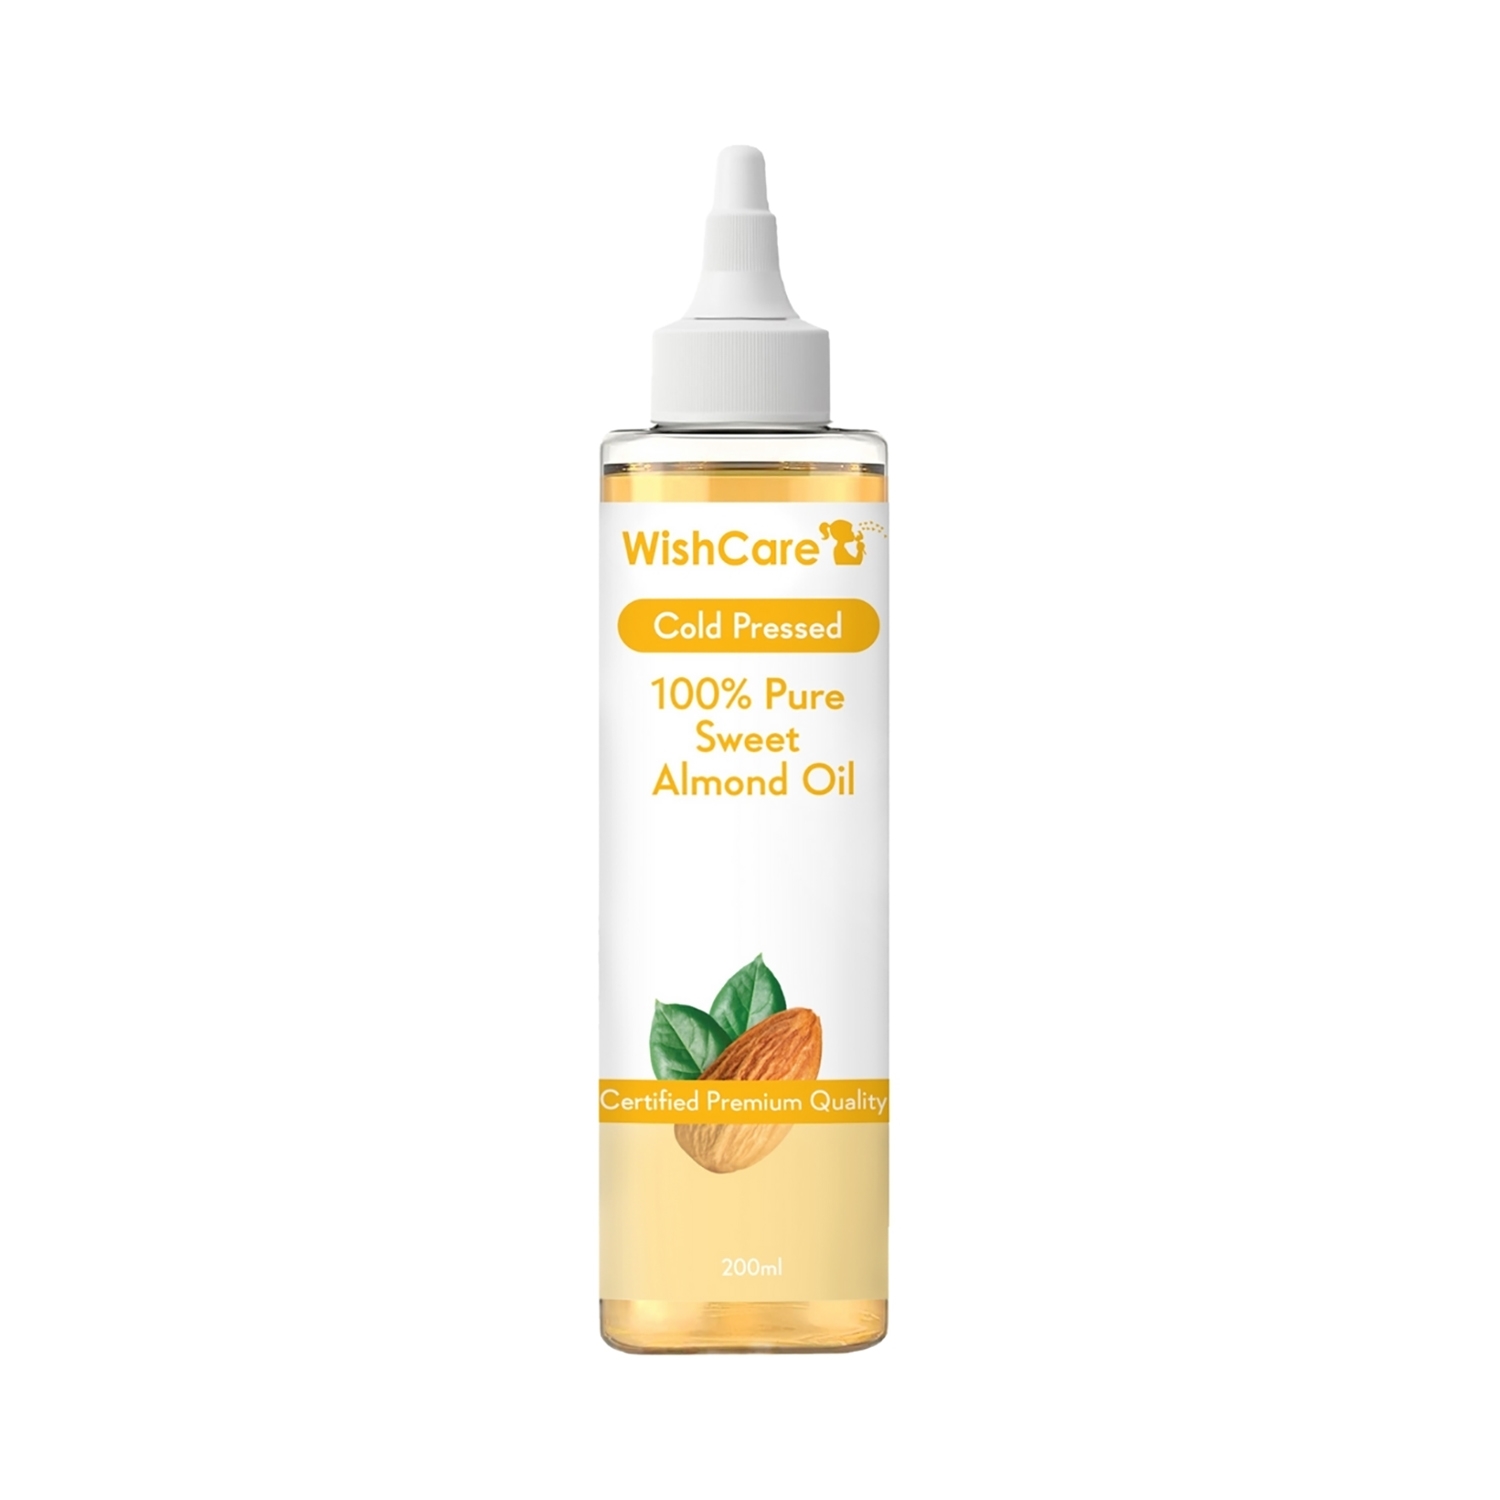 WishCare | Wishcare 100% Pure Cold Pressed Sweet Almond Oil (200ml)